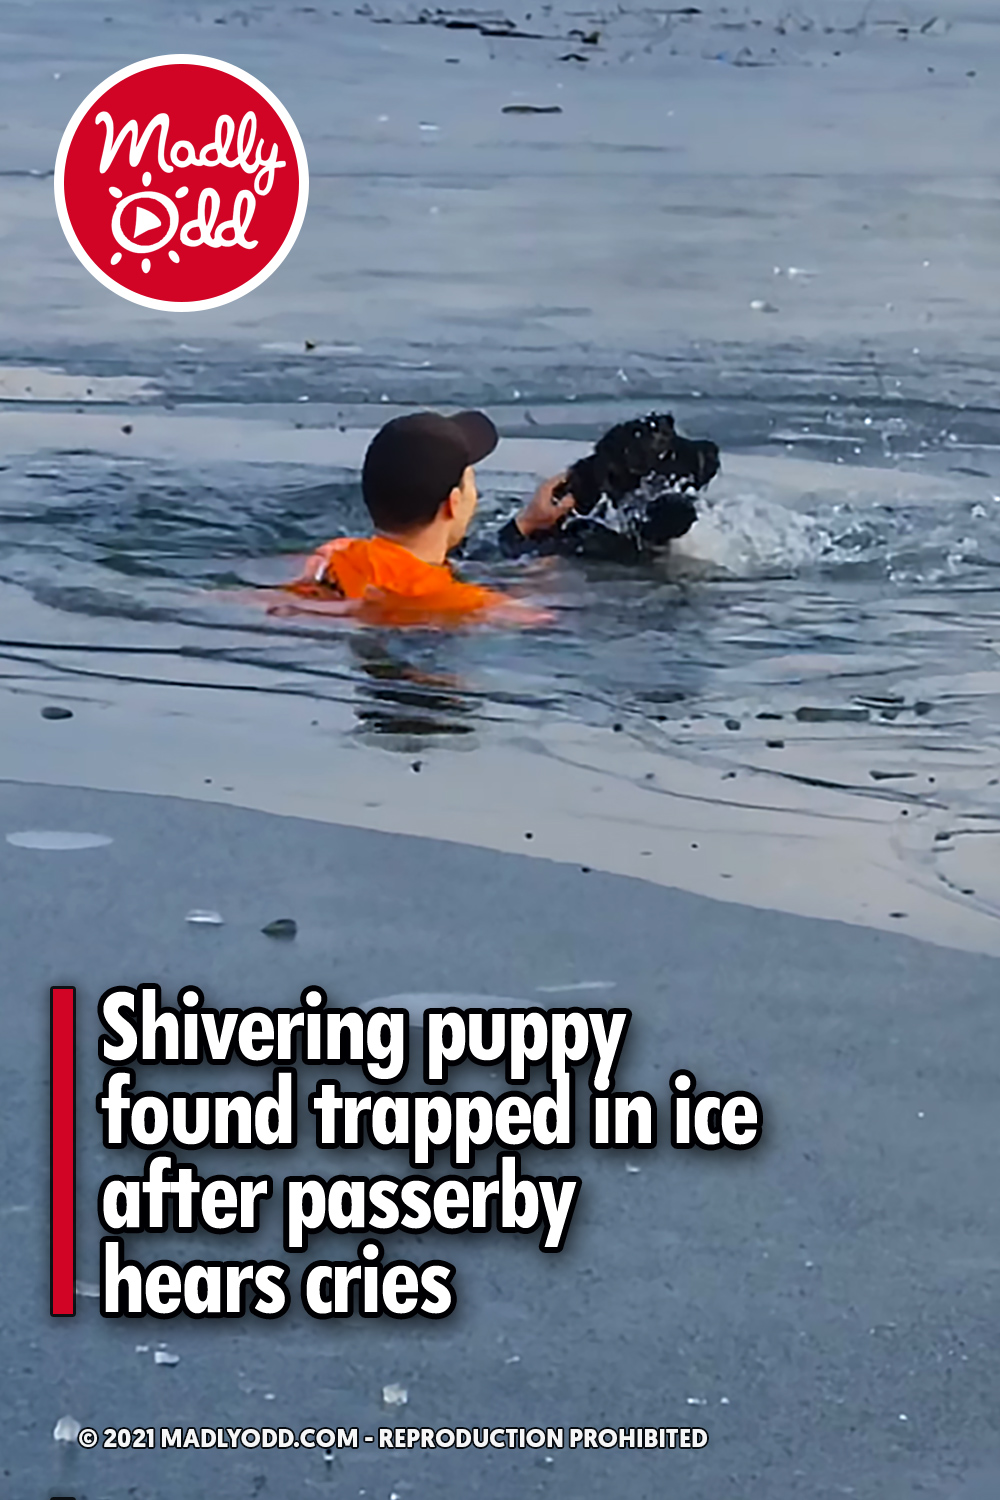 Shivering puppy found trapped in ice after passerby hears cries